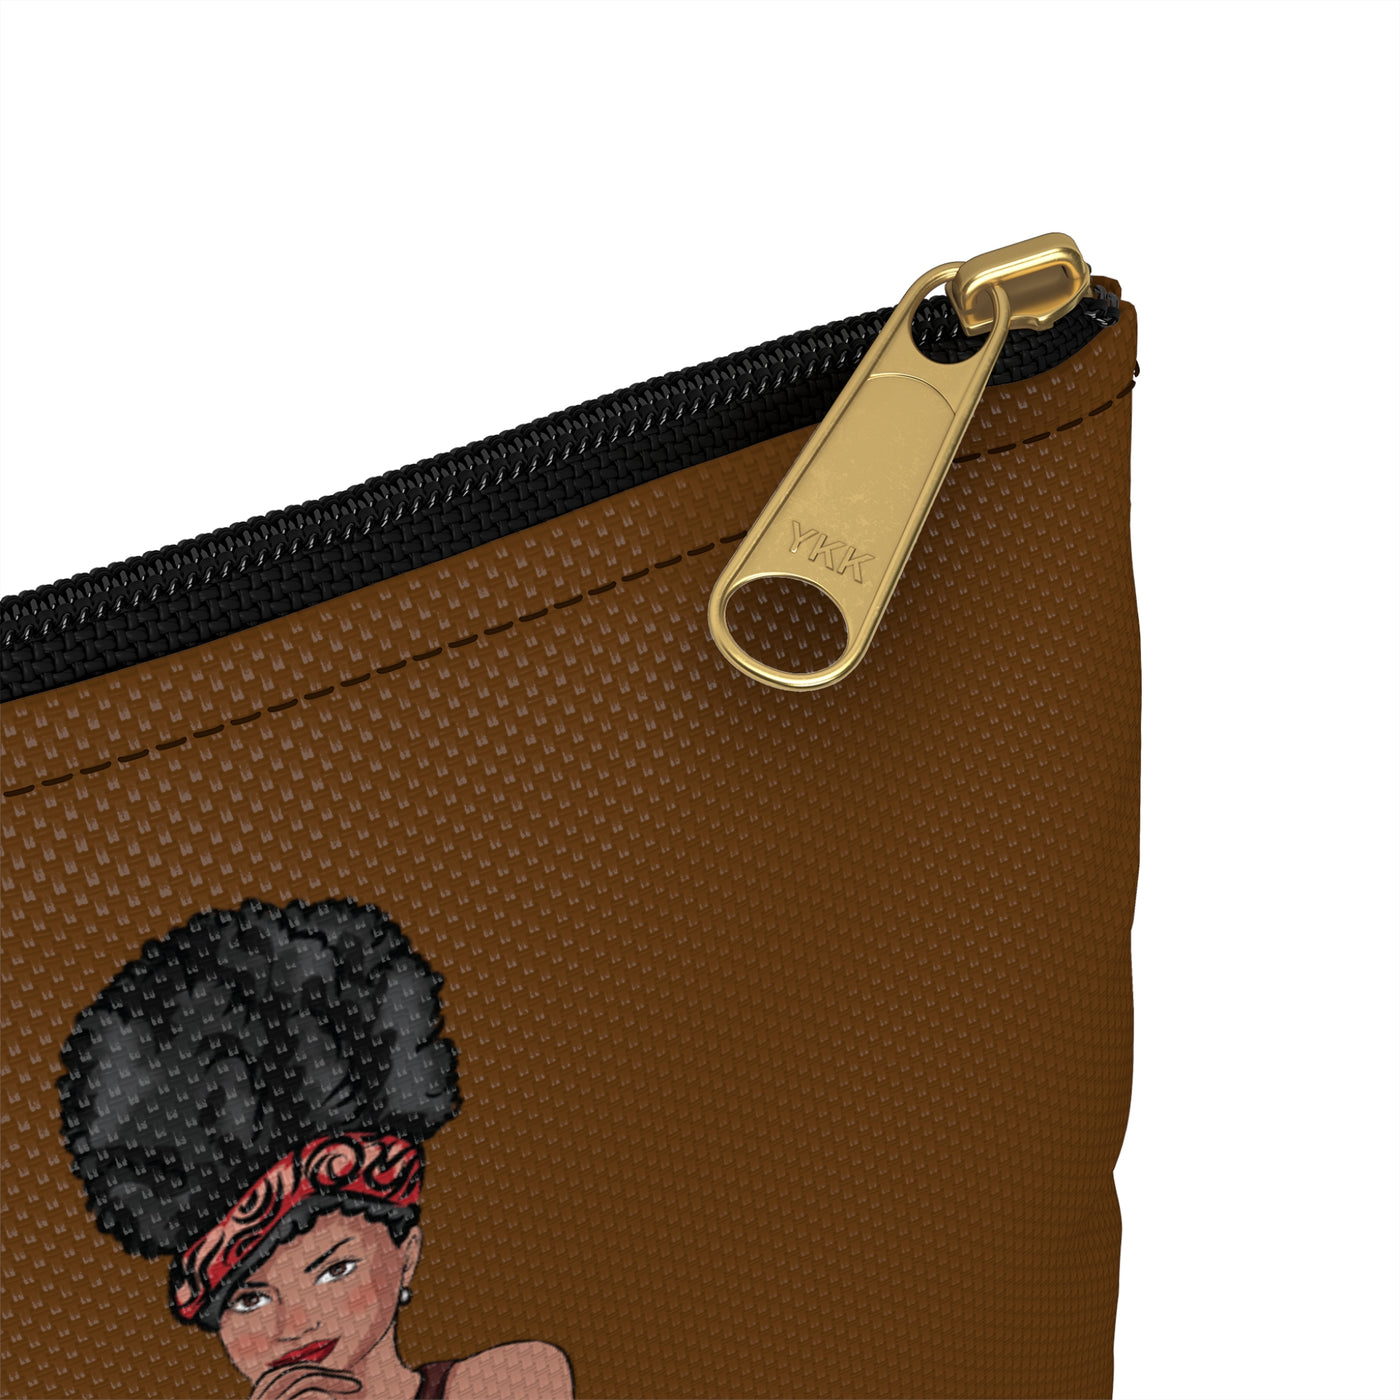 Sassy Accessory Pouch Brown